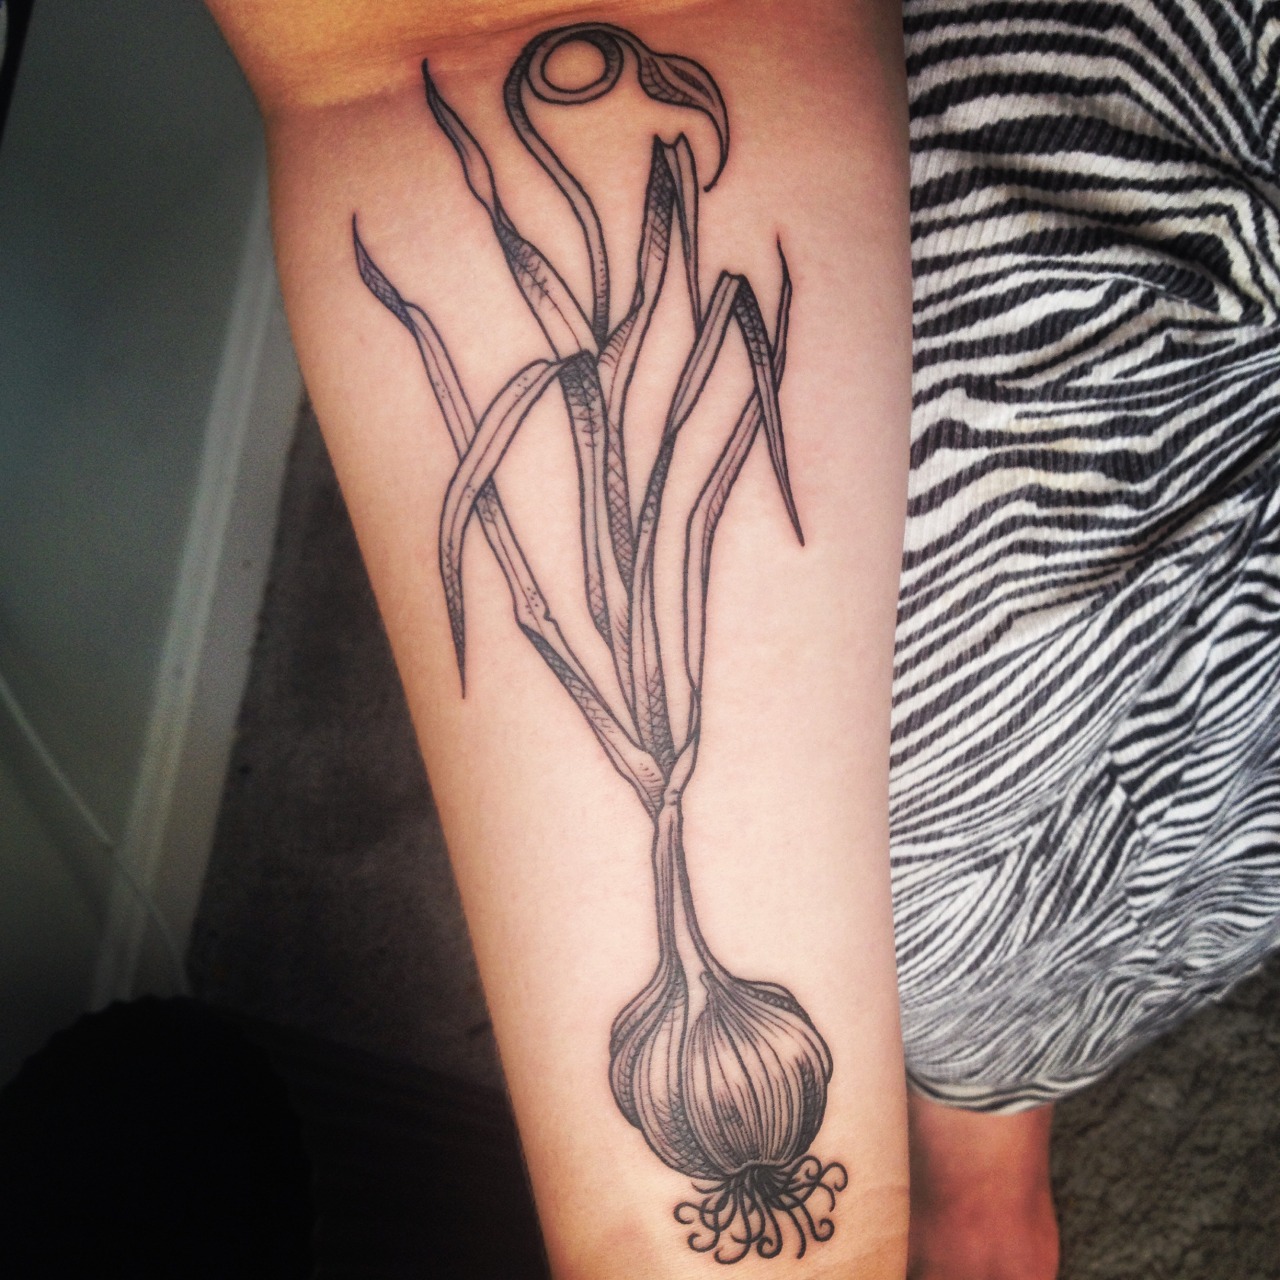  — My garlic plant done by Kyle Oxford at Read Street...